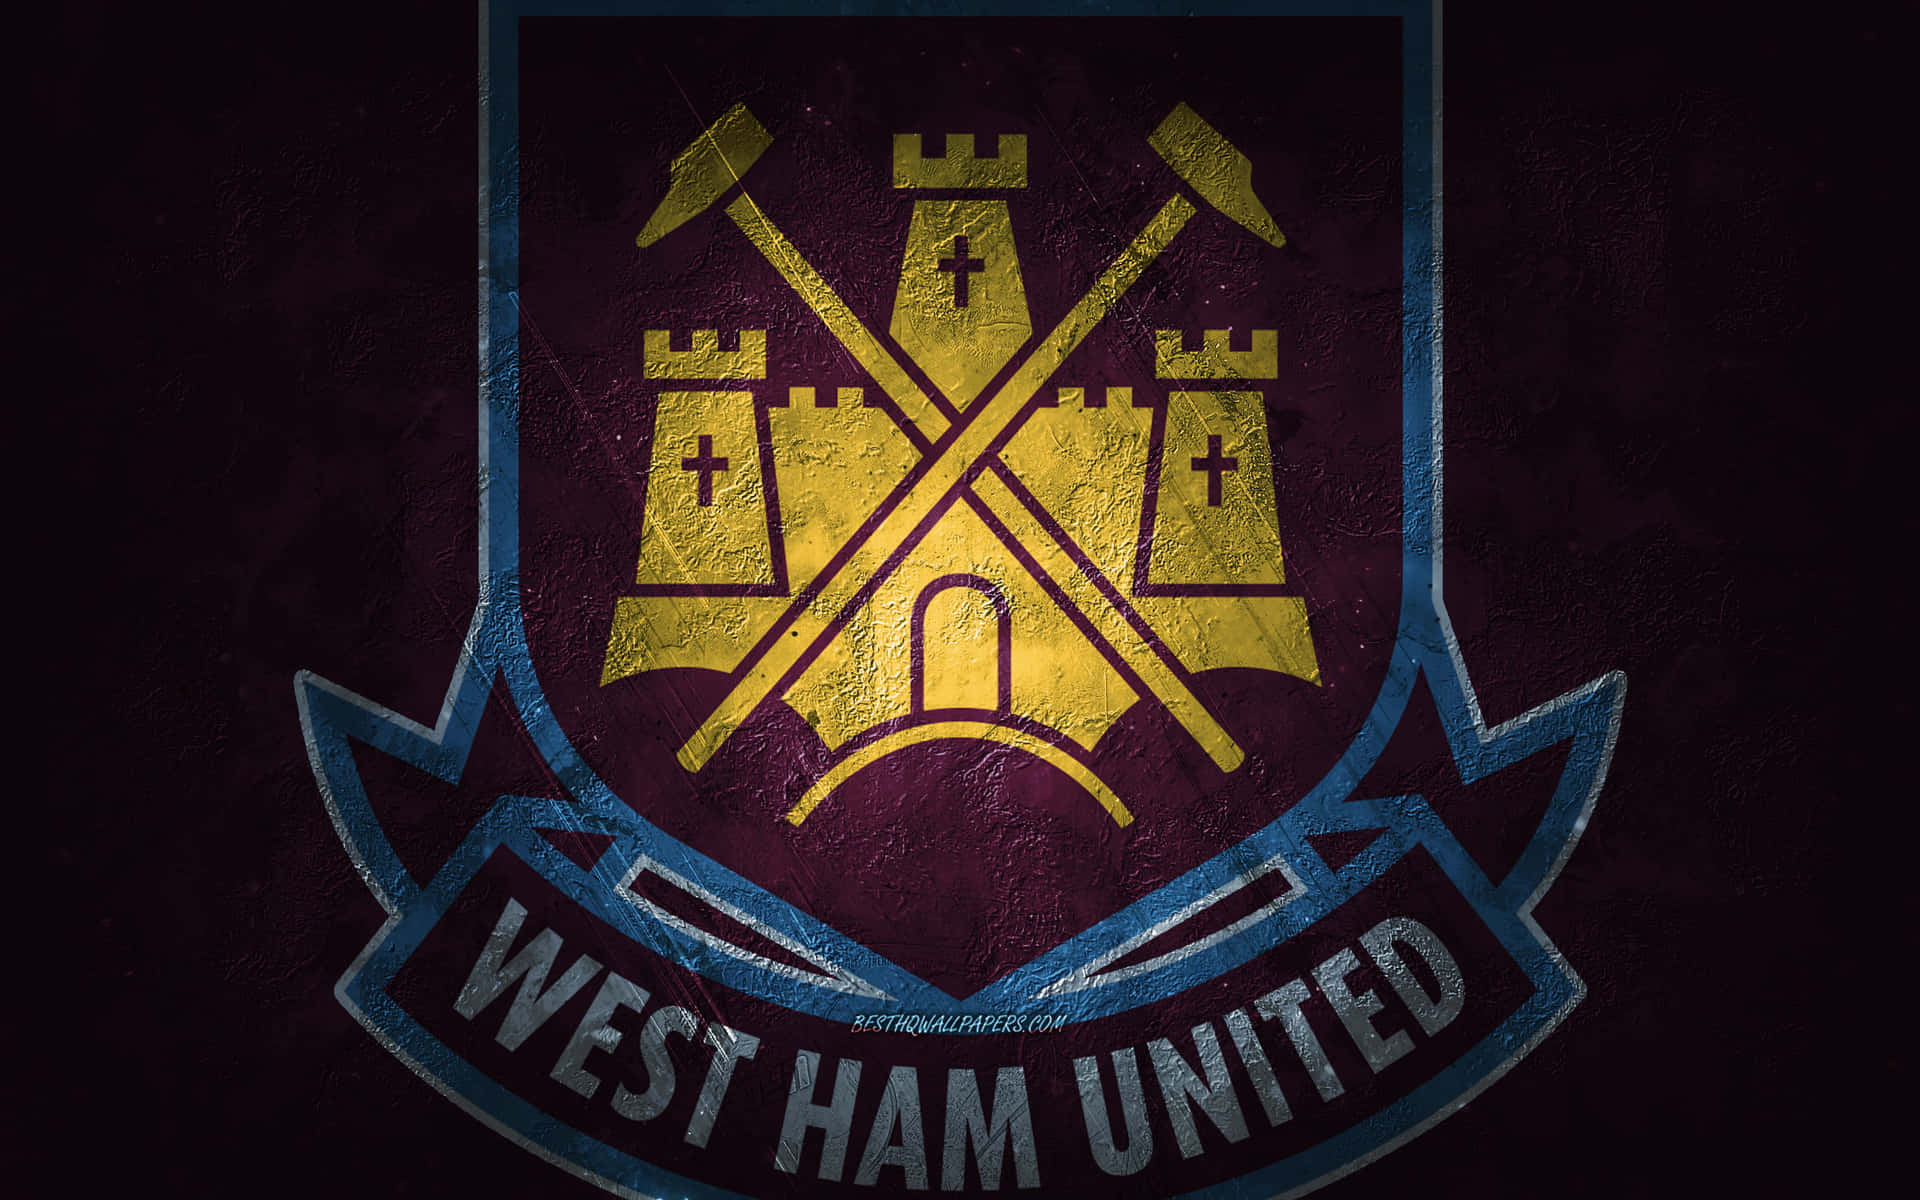 West Ham United Fc In Action Wallpaper